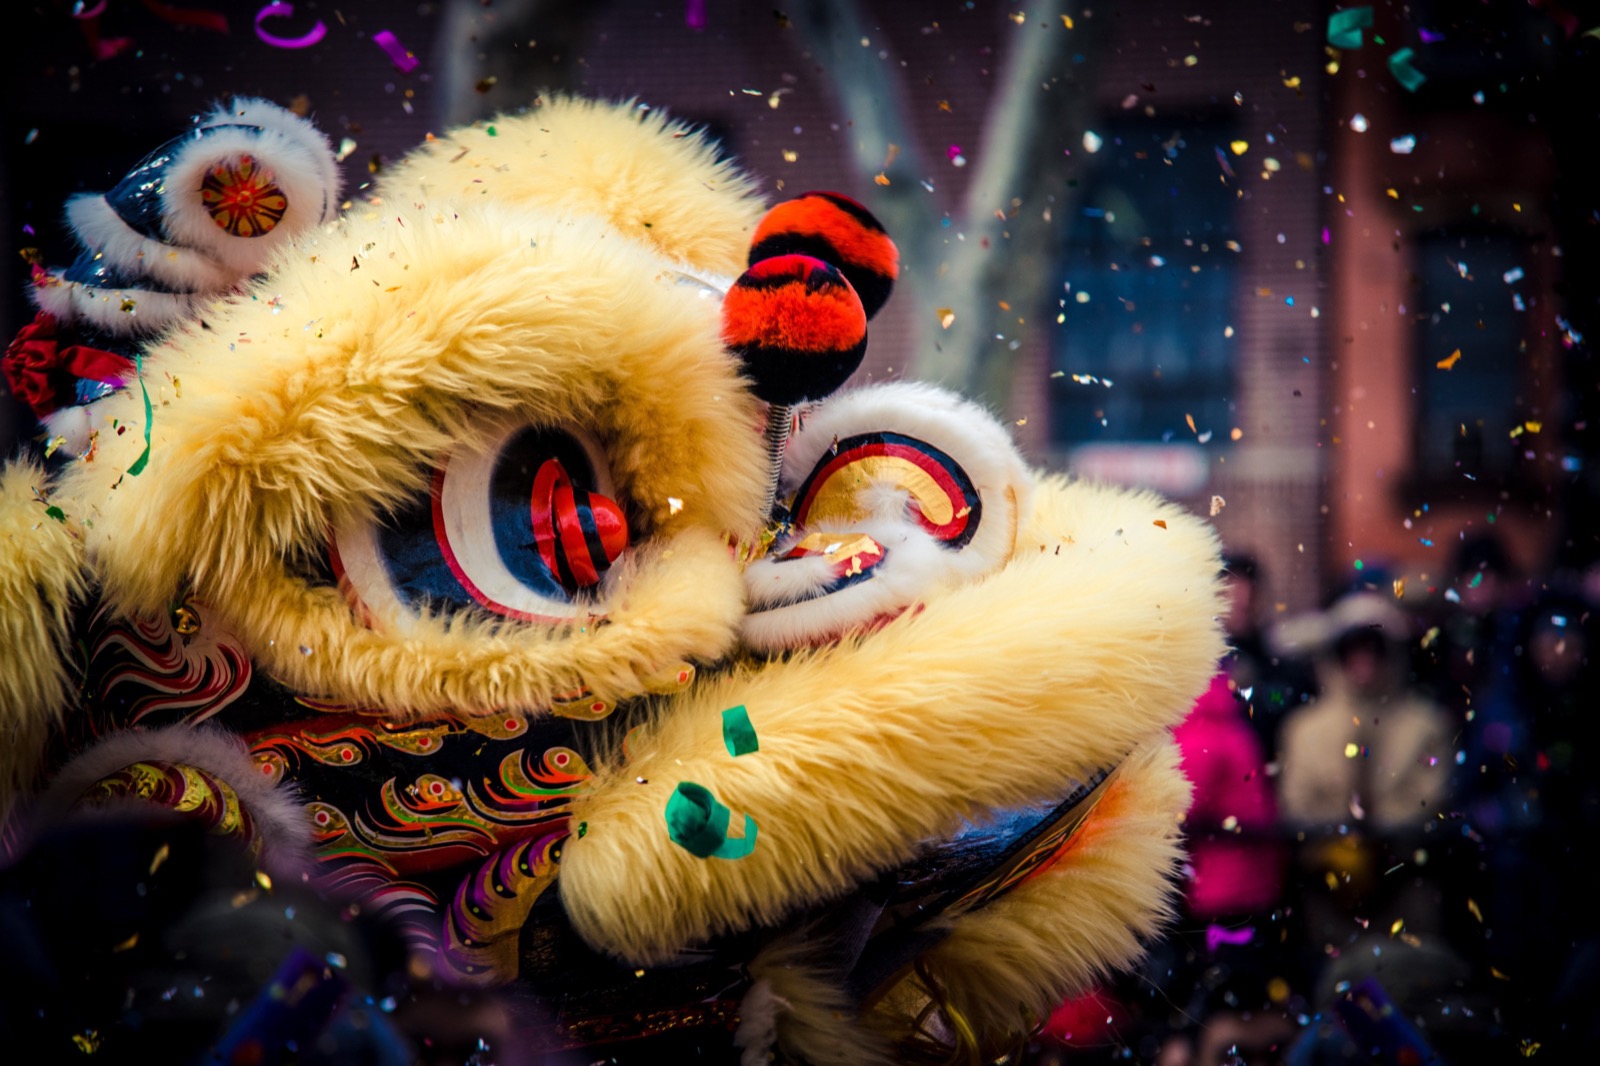 Chinese New Year Trivia Questions And Answers Lion dance